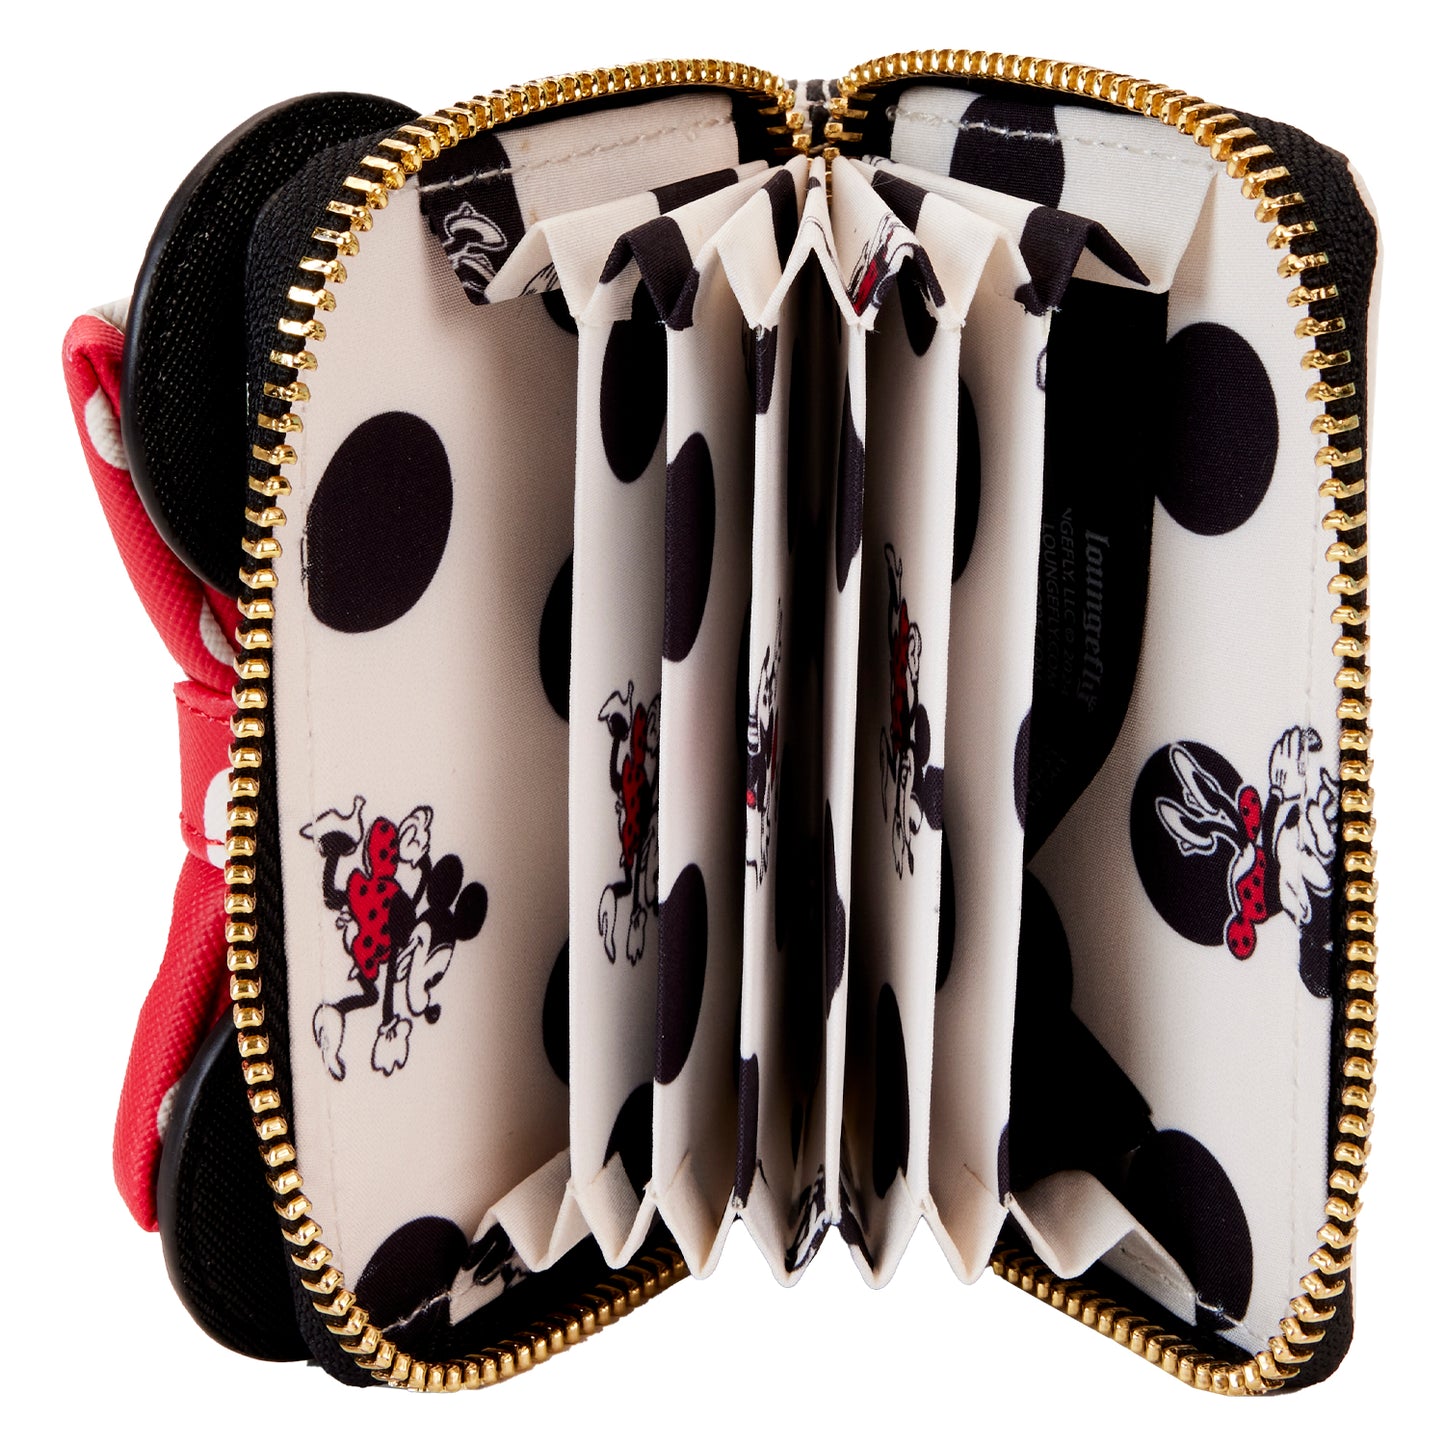 Minnie Mouse Rock the Dots Accordion Cardholder